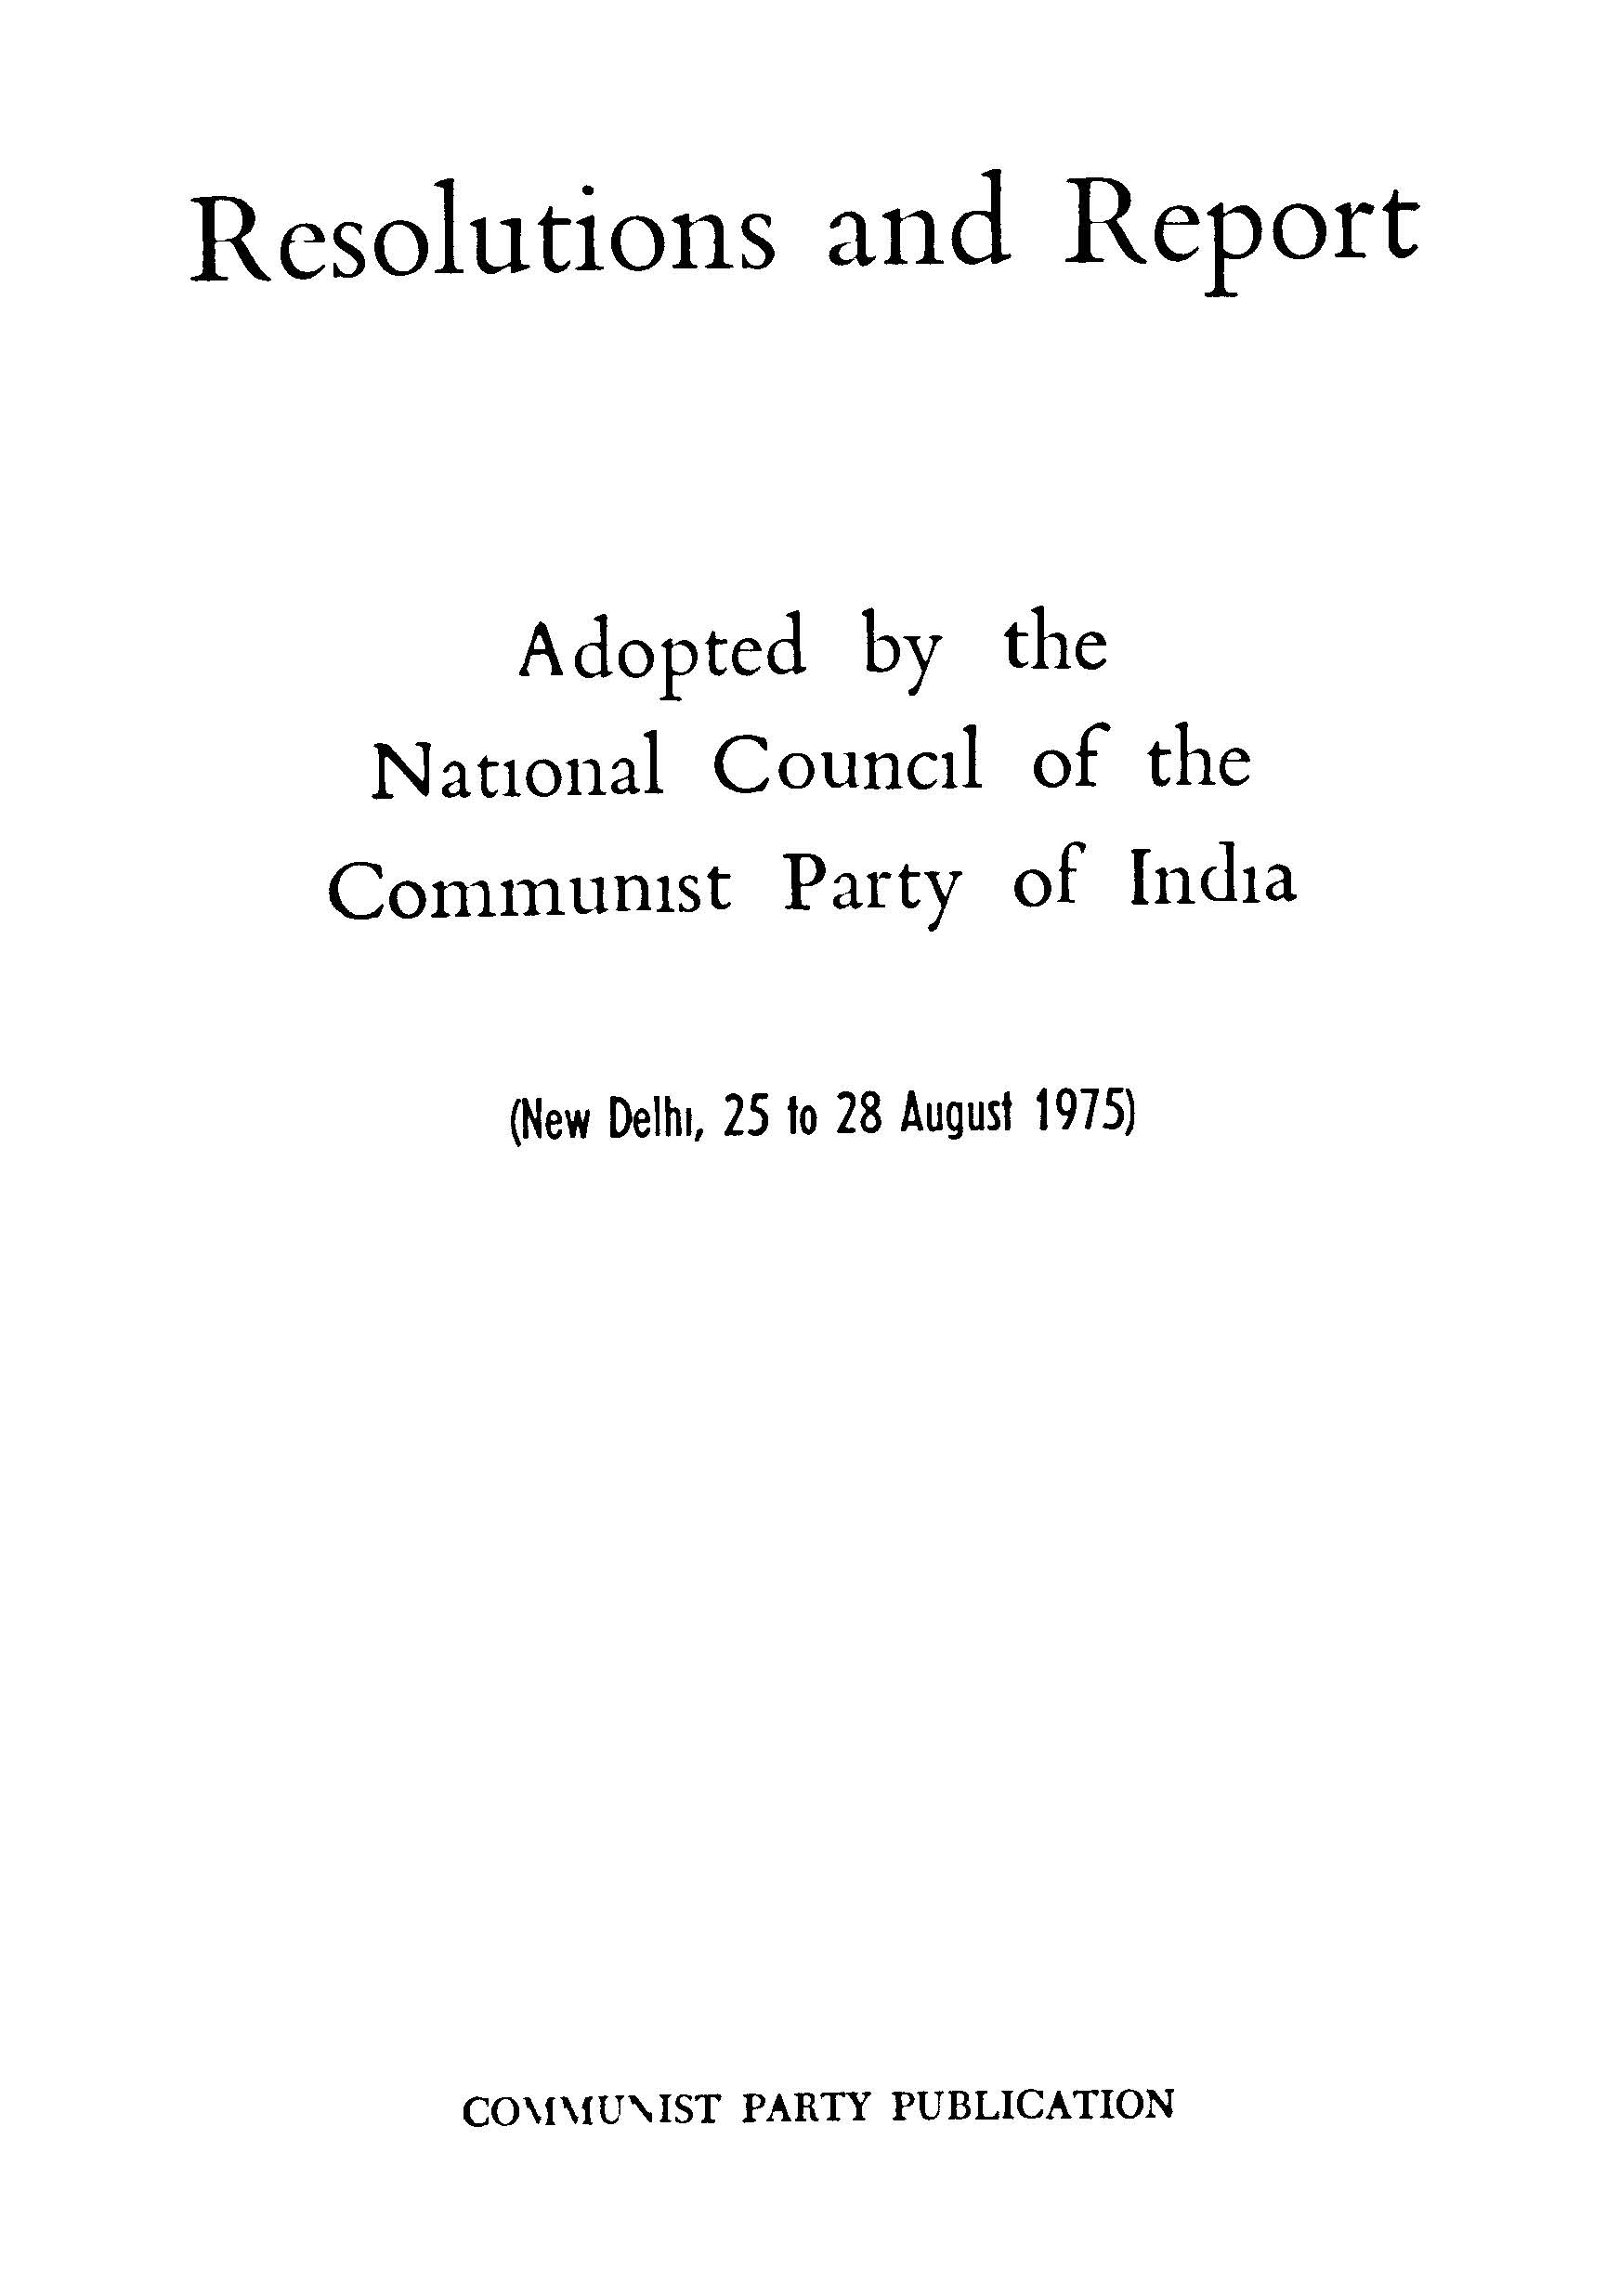 Resolutions And Report Adopted By The National Council Of (CPI) New Delhi,25 to 28 August 1975